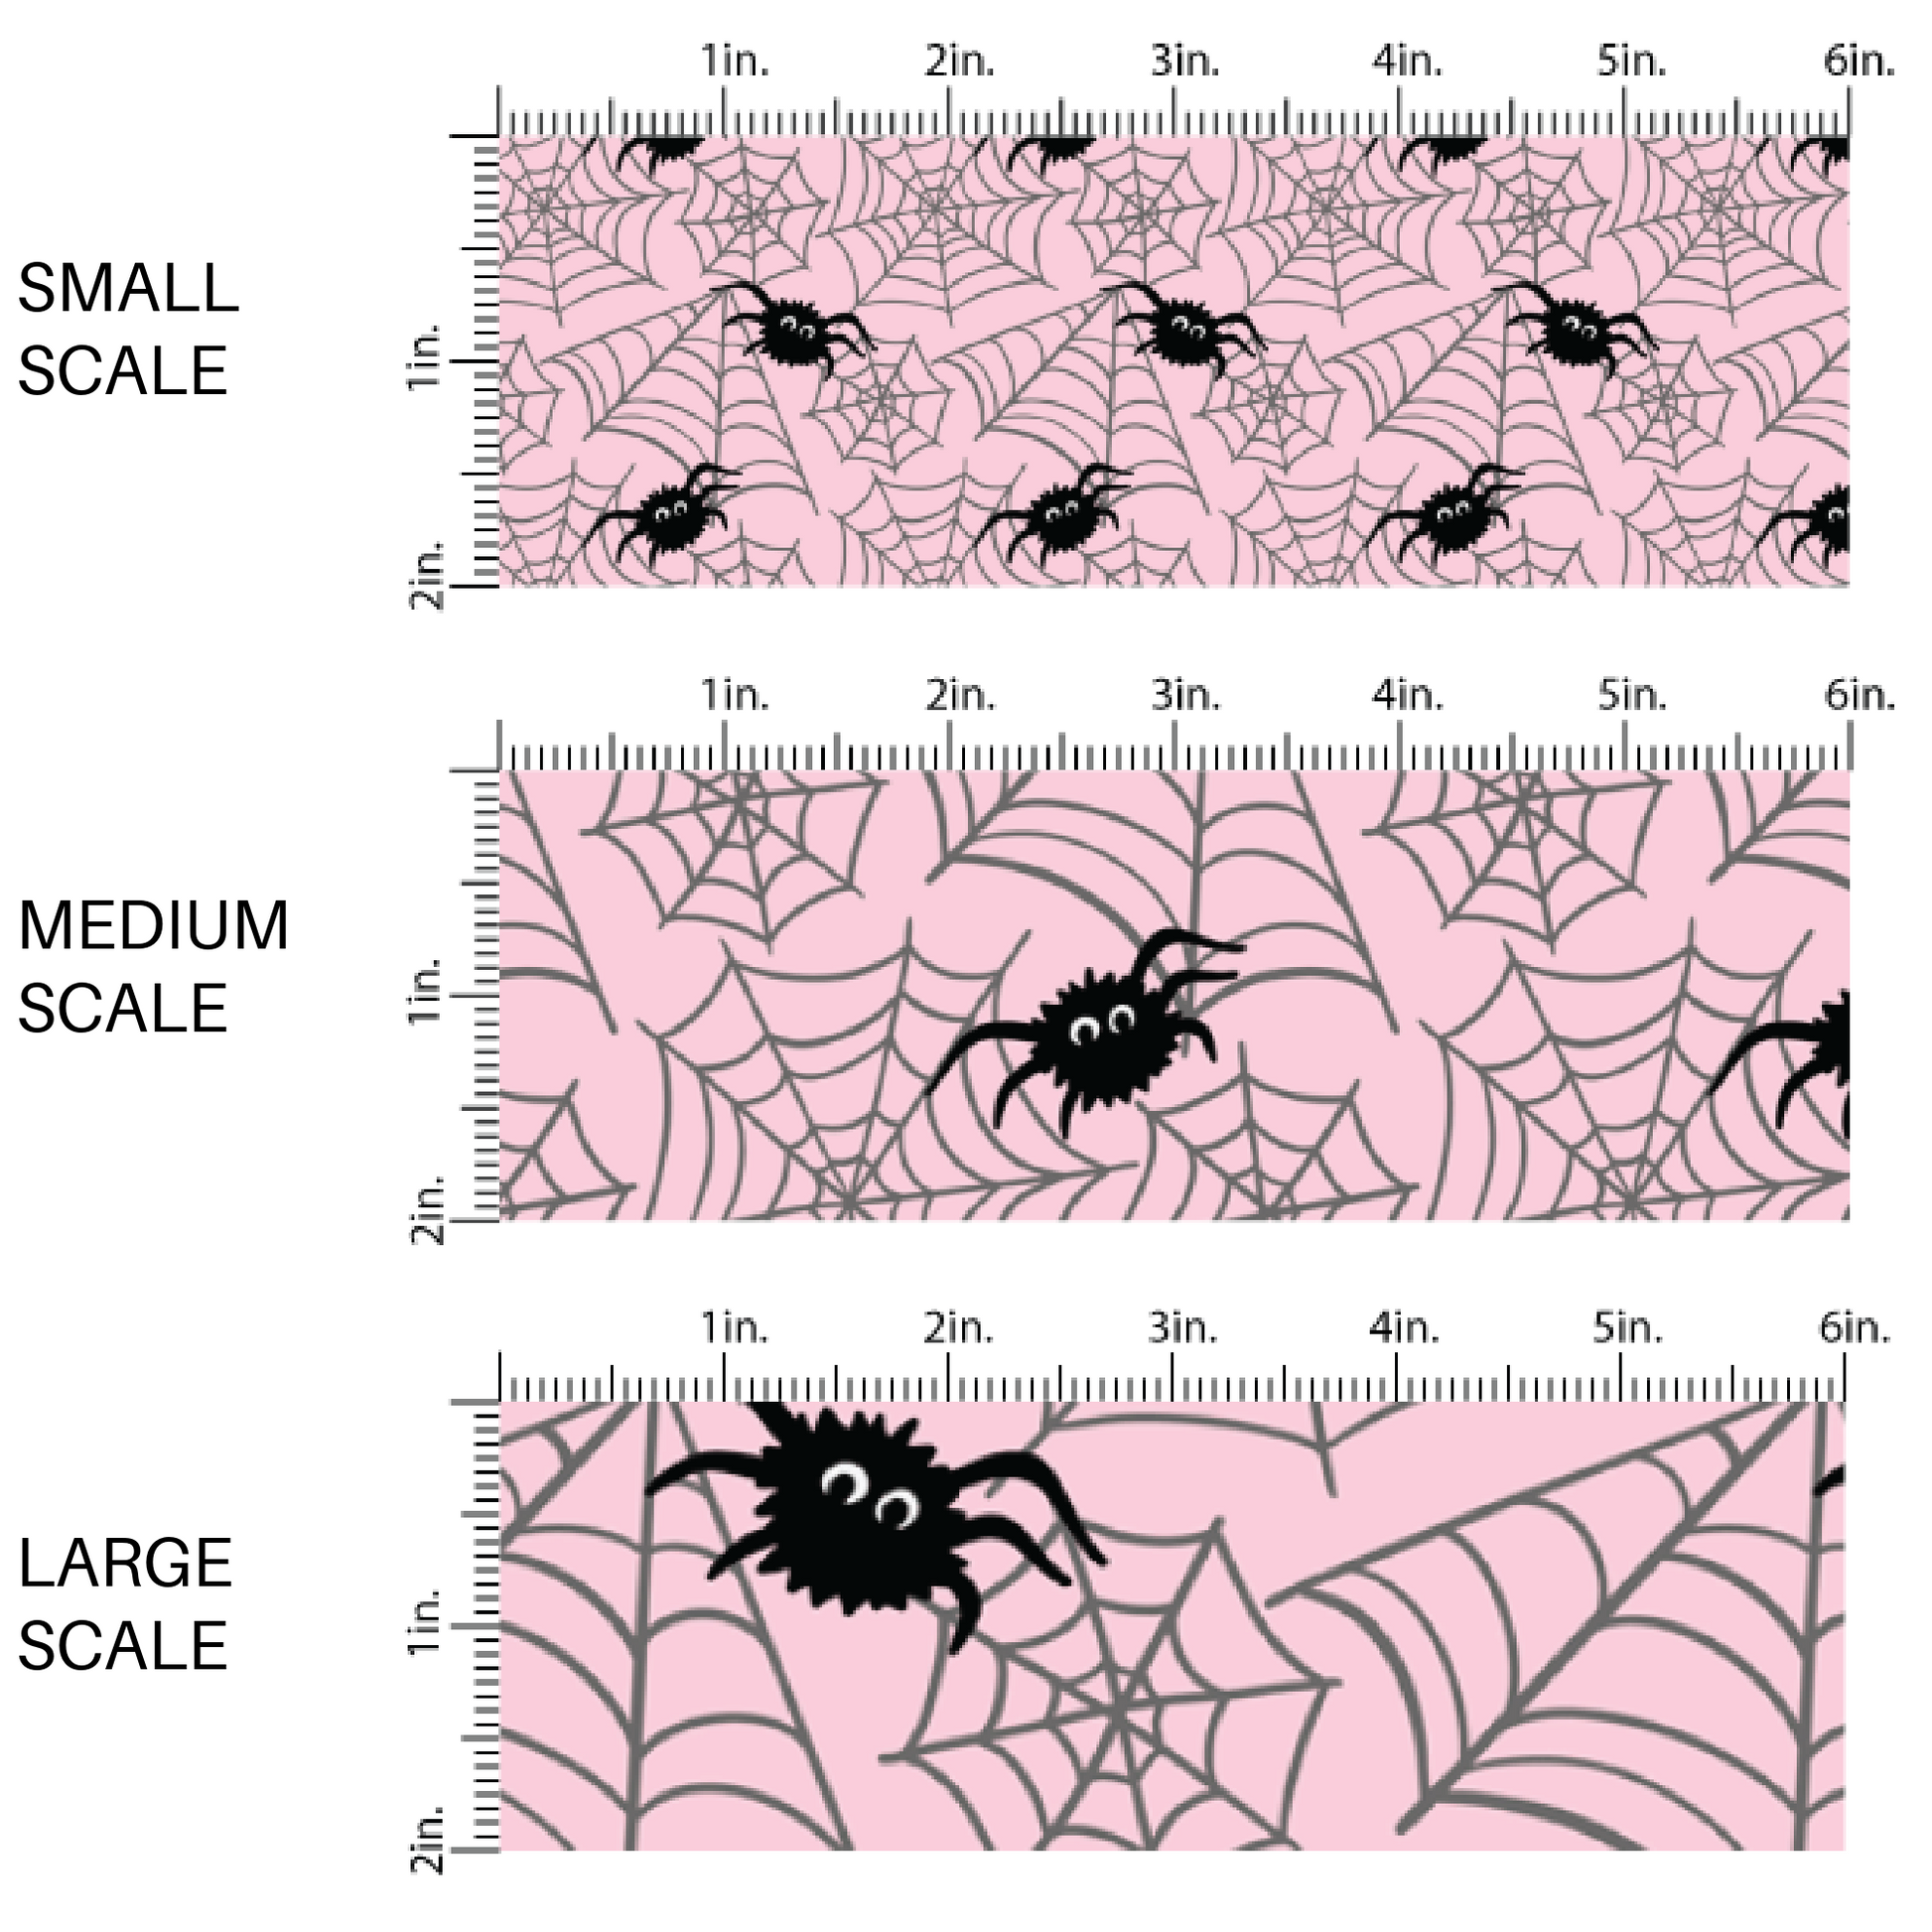 Light pink fabric by the yard scaled image guide with black spiders and spiderwebs.